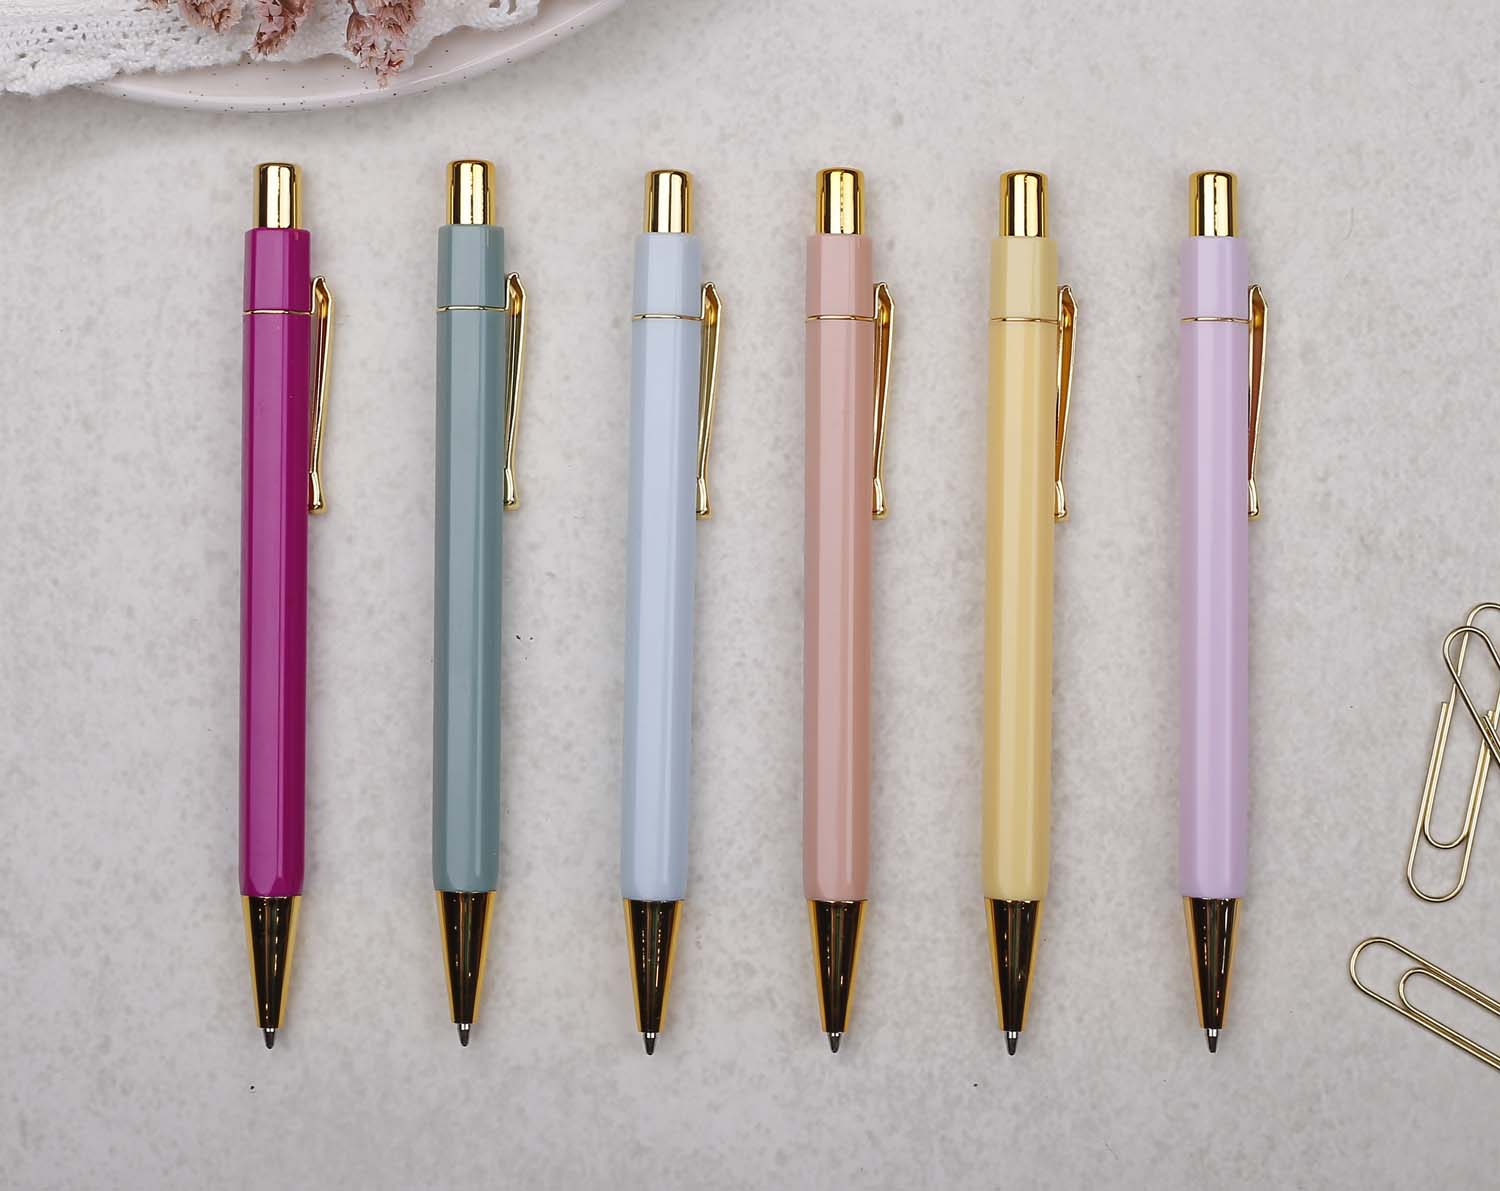 A premium pink and gold pen with ballpoint tip and hexagonal barrel detail